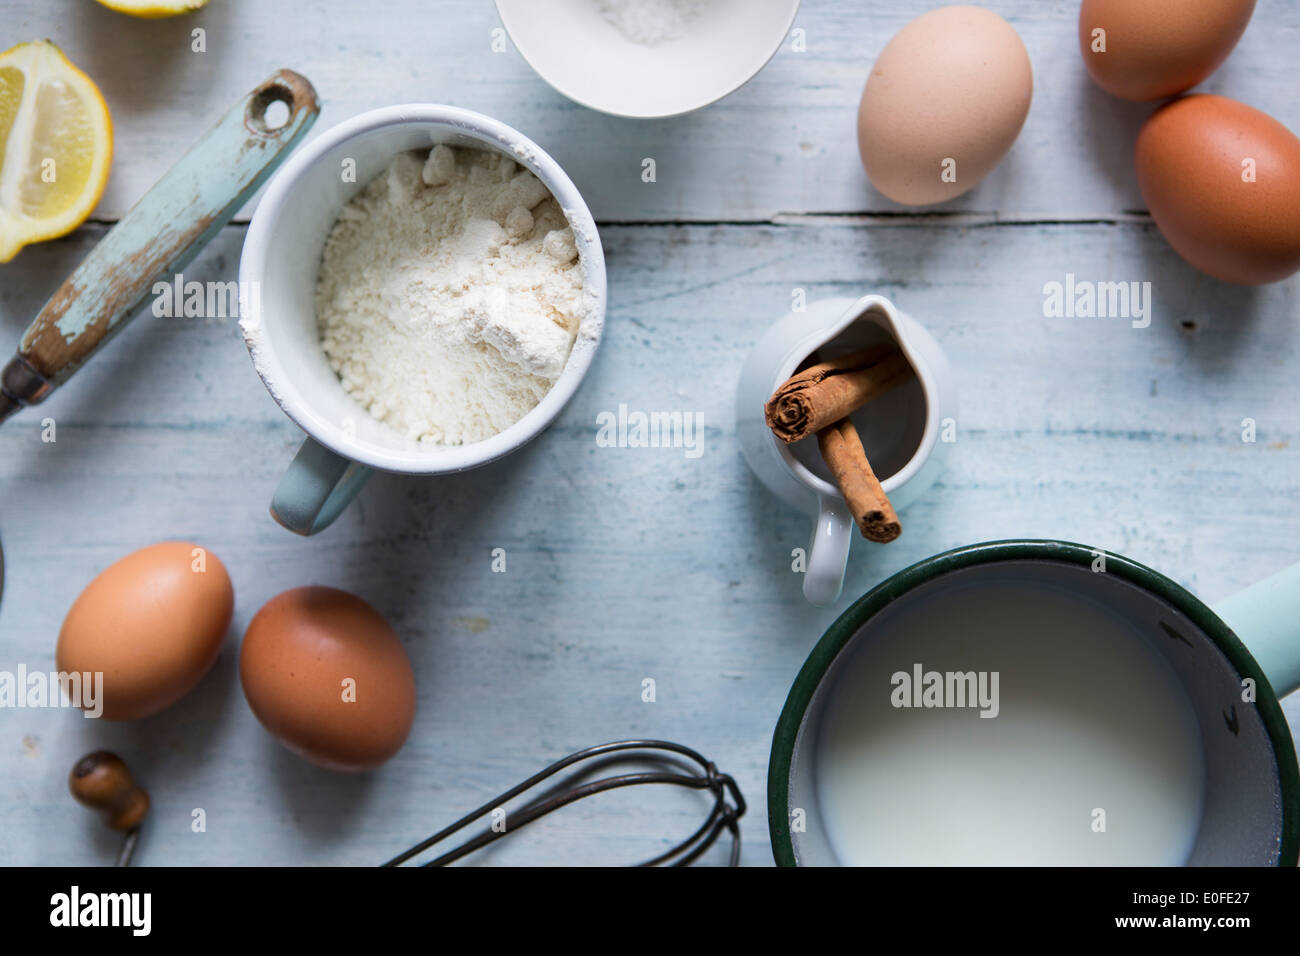 Ingredients for making pancakes, including eggs, flour cinnamon and a whisk Stock Photo